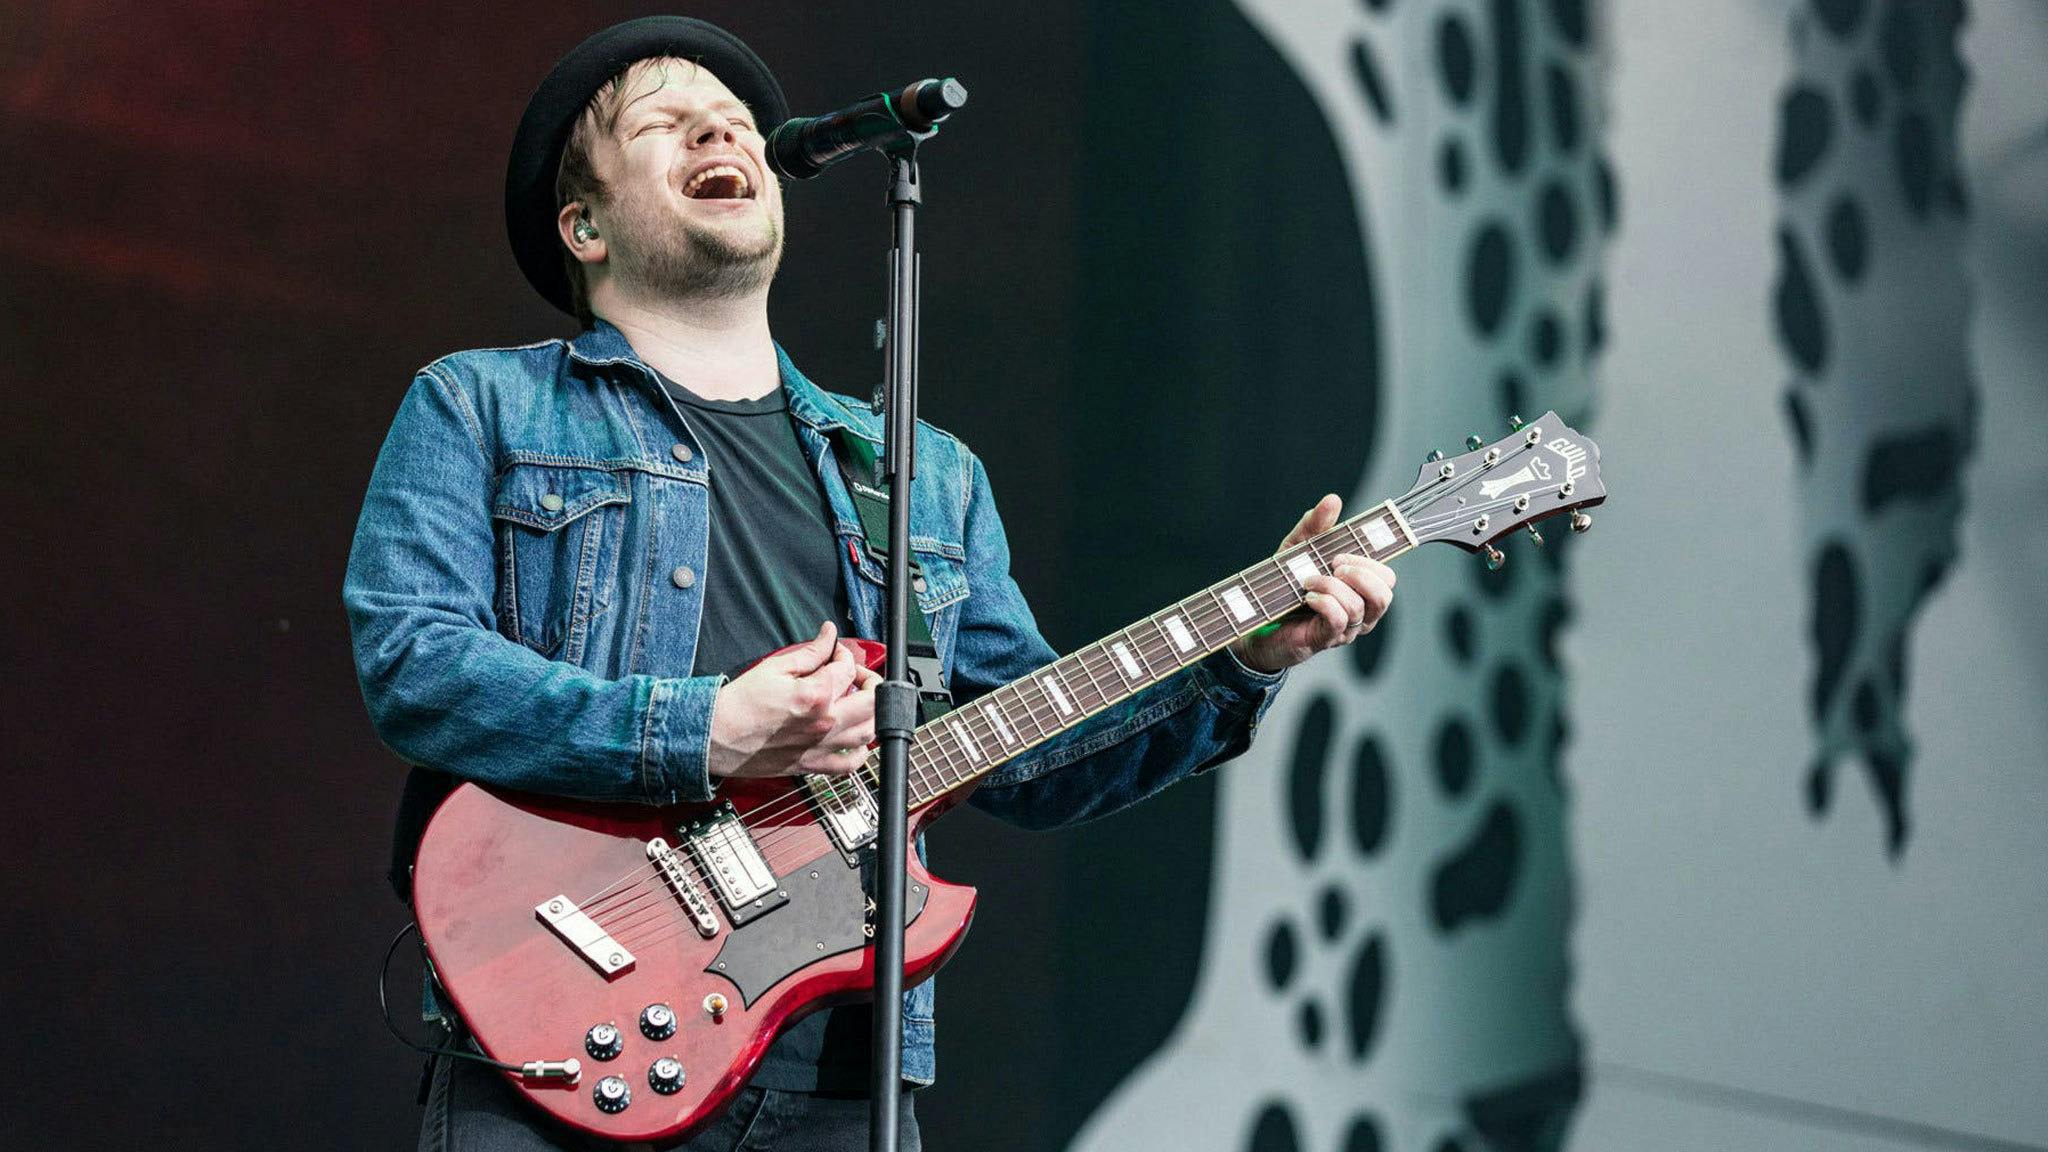 Fall Out Boy were working on “guitar-based” material that is now on the “back-burner”